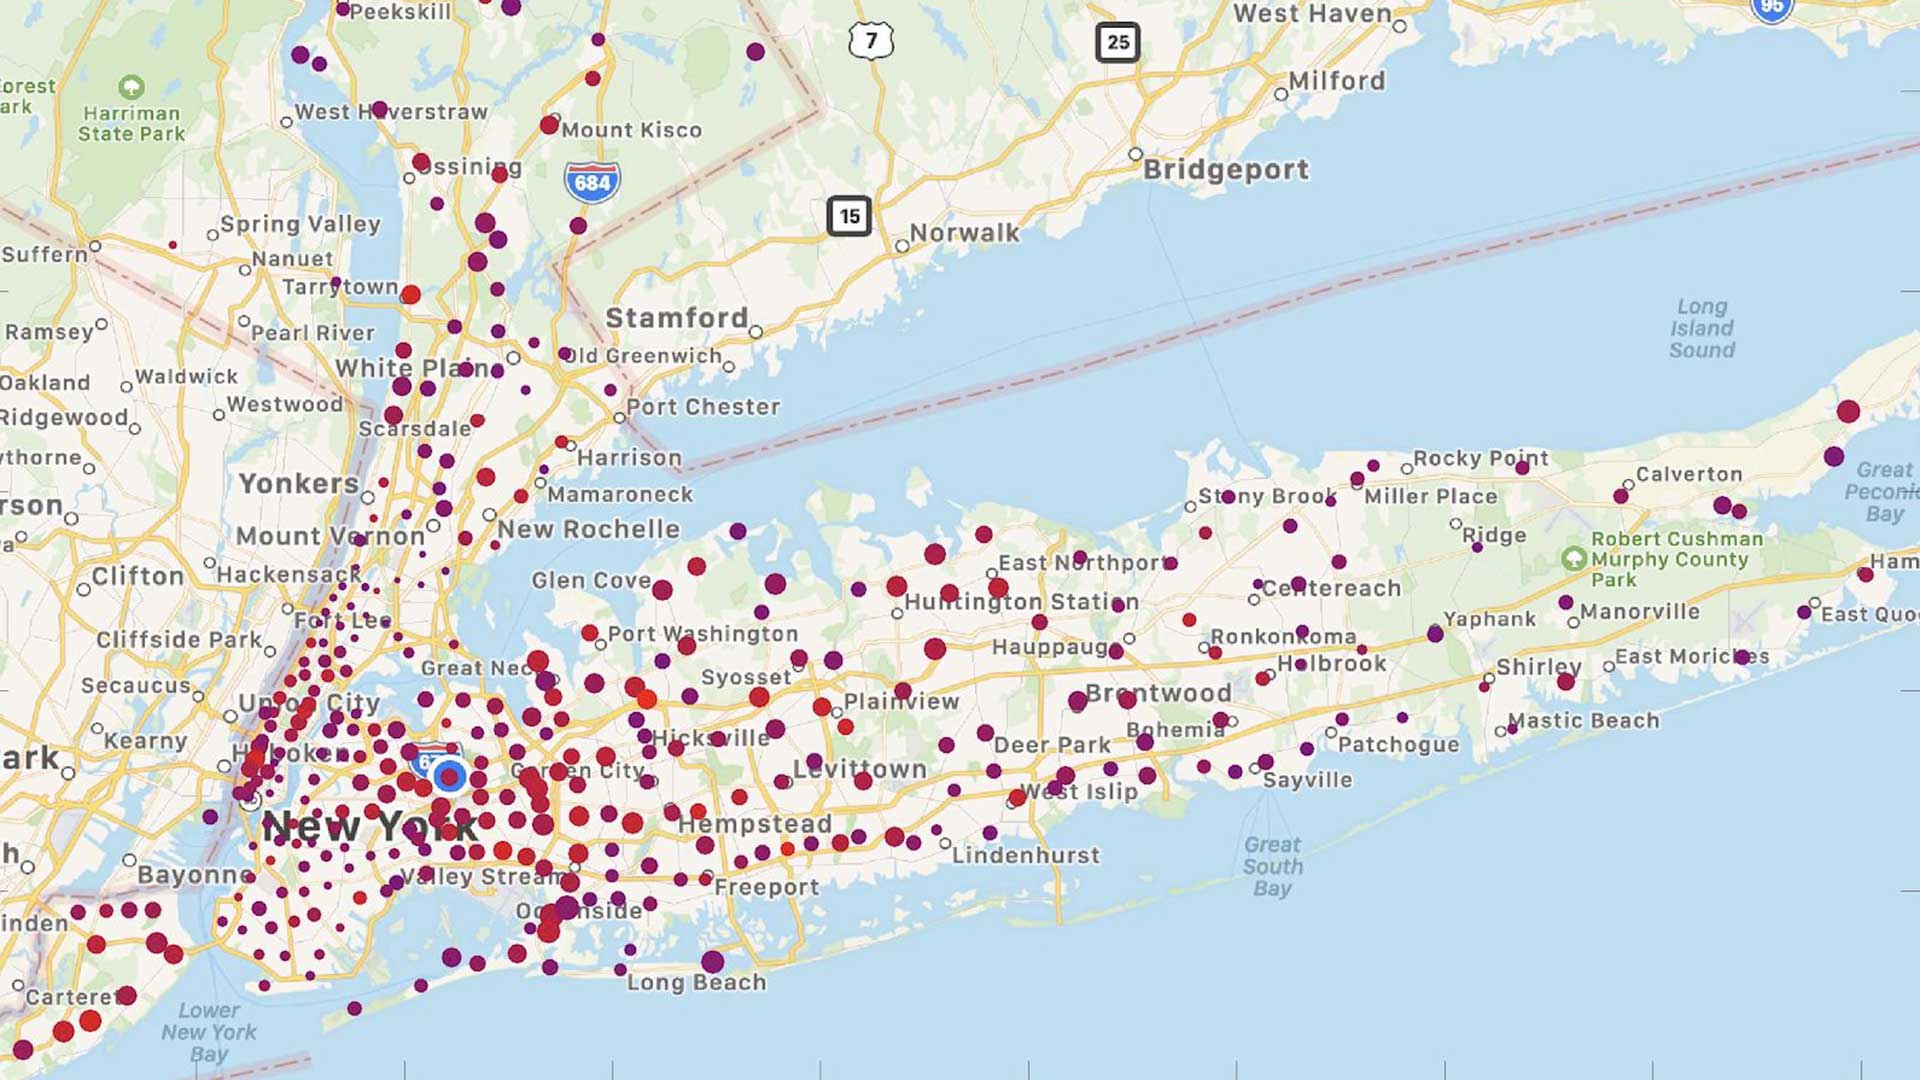 image of New York metro area and Long Island showing rate of COVID positive people